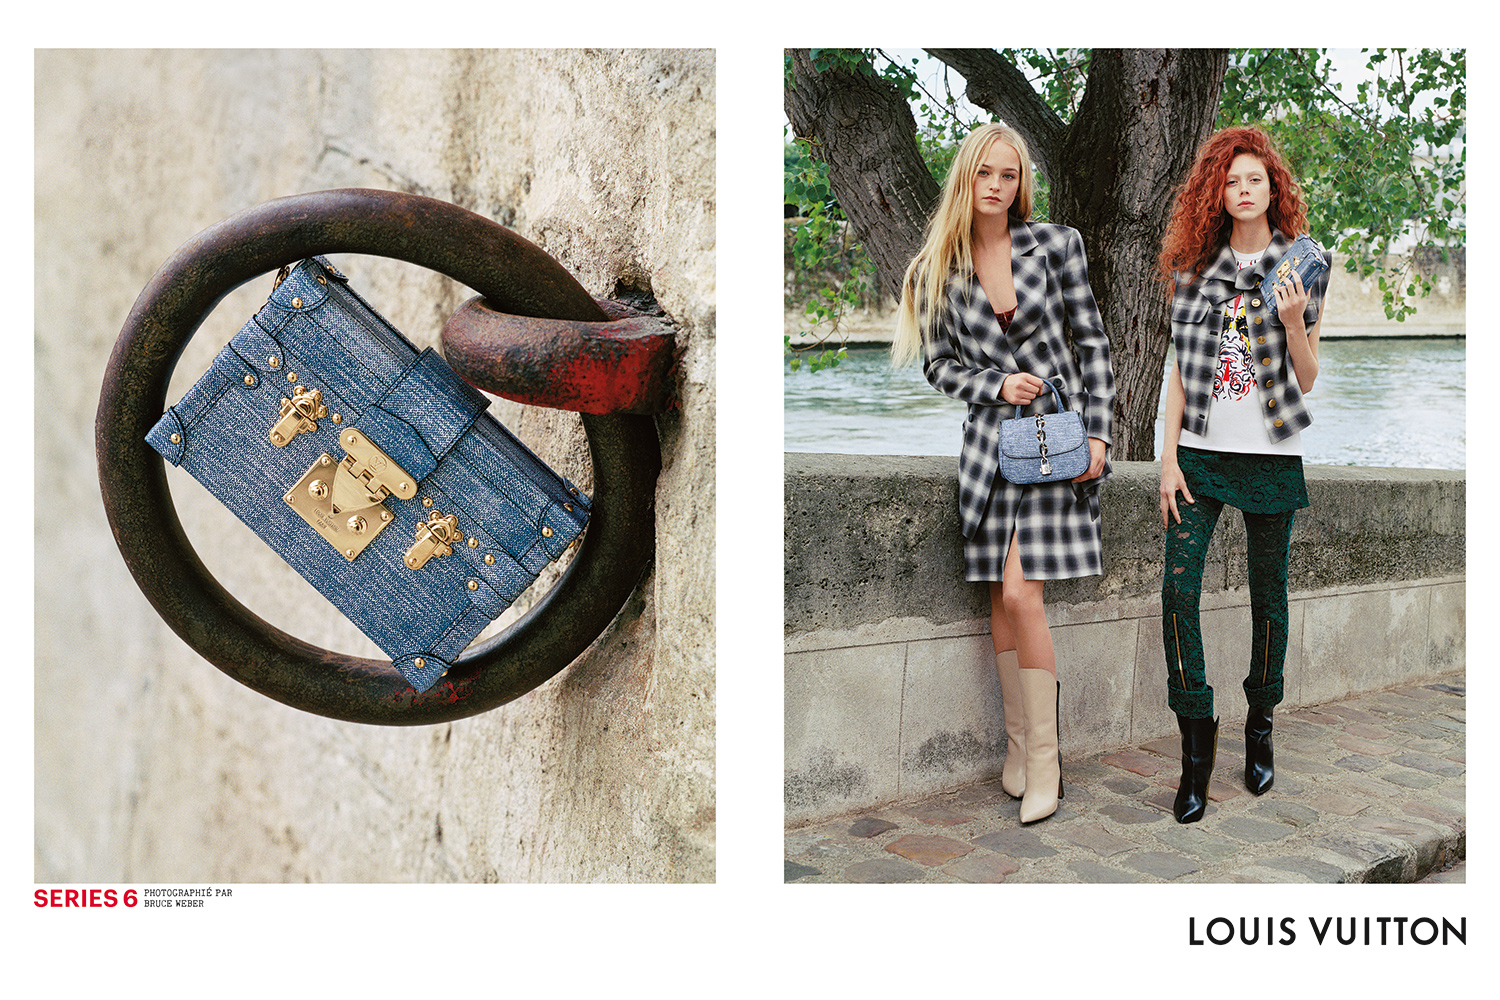 Walking into the Reminiscent Past of Louis Vuitton’s Handbags